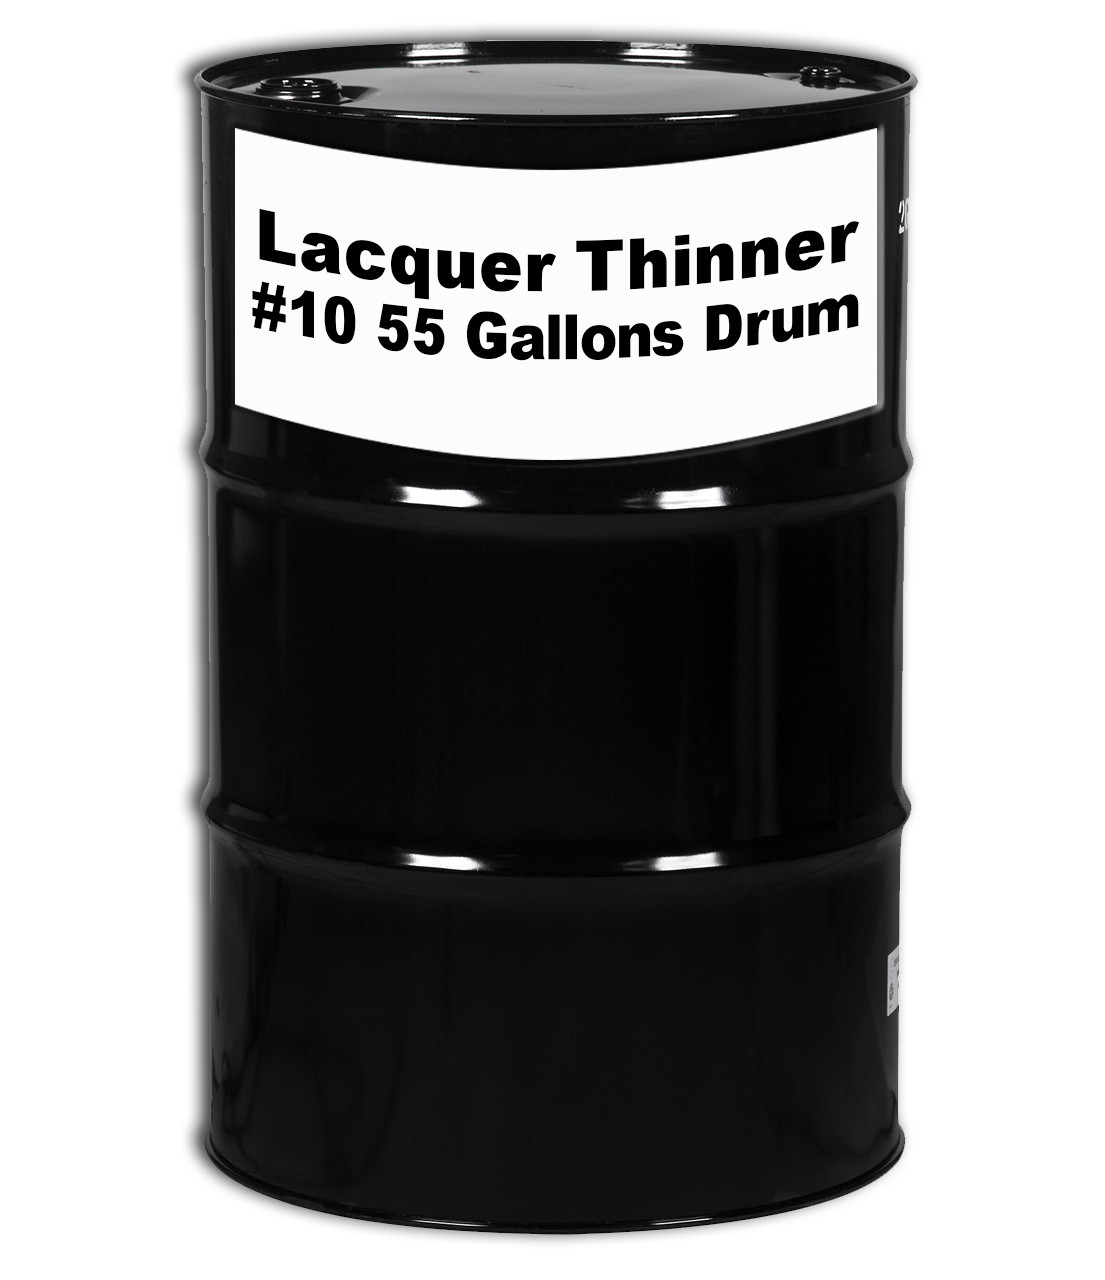 Professional Wood Finish Lacquer Thinner #10 (LT-1610) 55 Gallons Drum